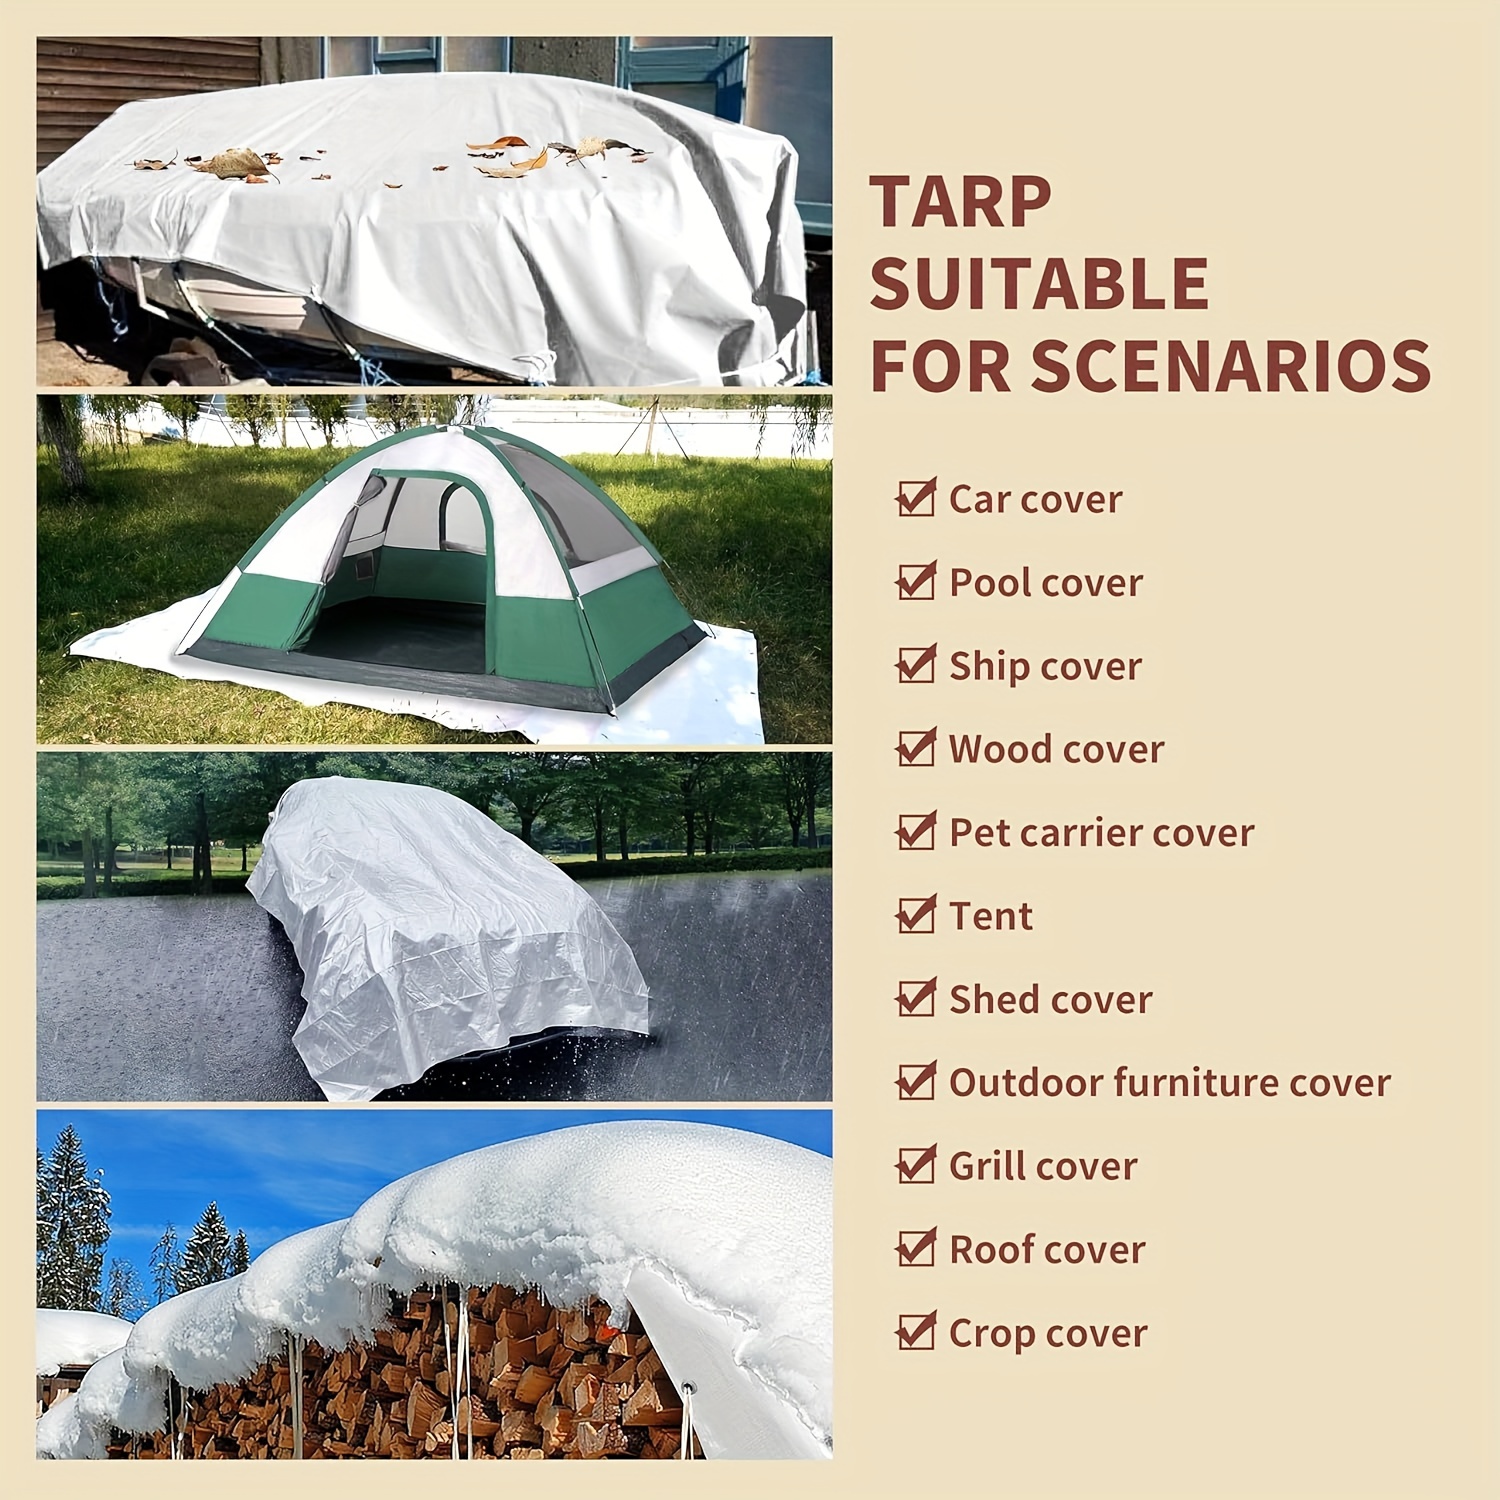 1pc heavy duty outdoor tarp waterproof thick tarp cover uv resistant rip tear proof with metal grommets tarpaulin multipurpose use for camping tent boat rv car patio pool